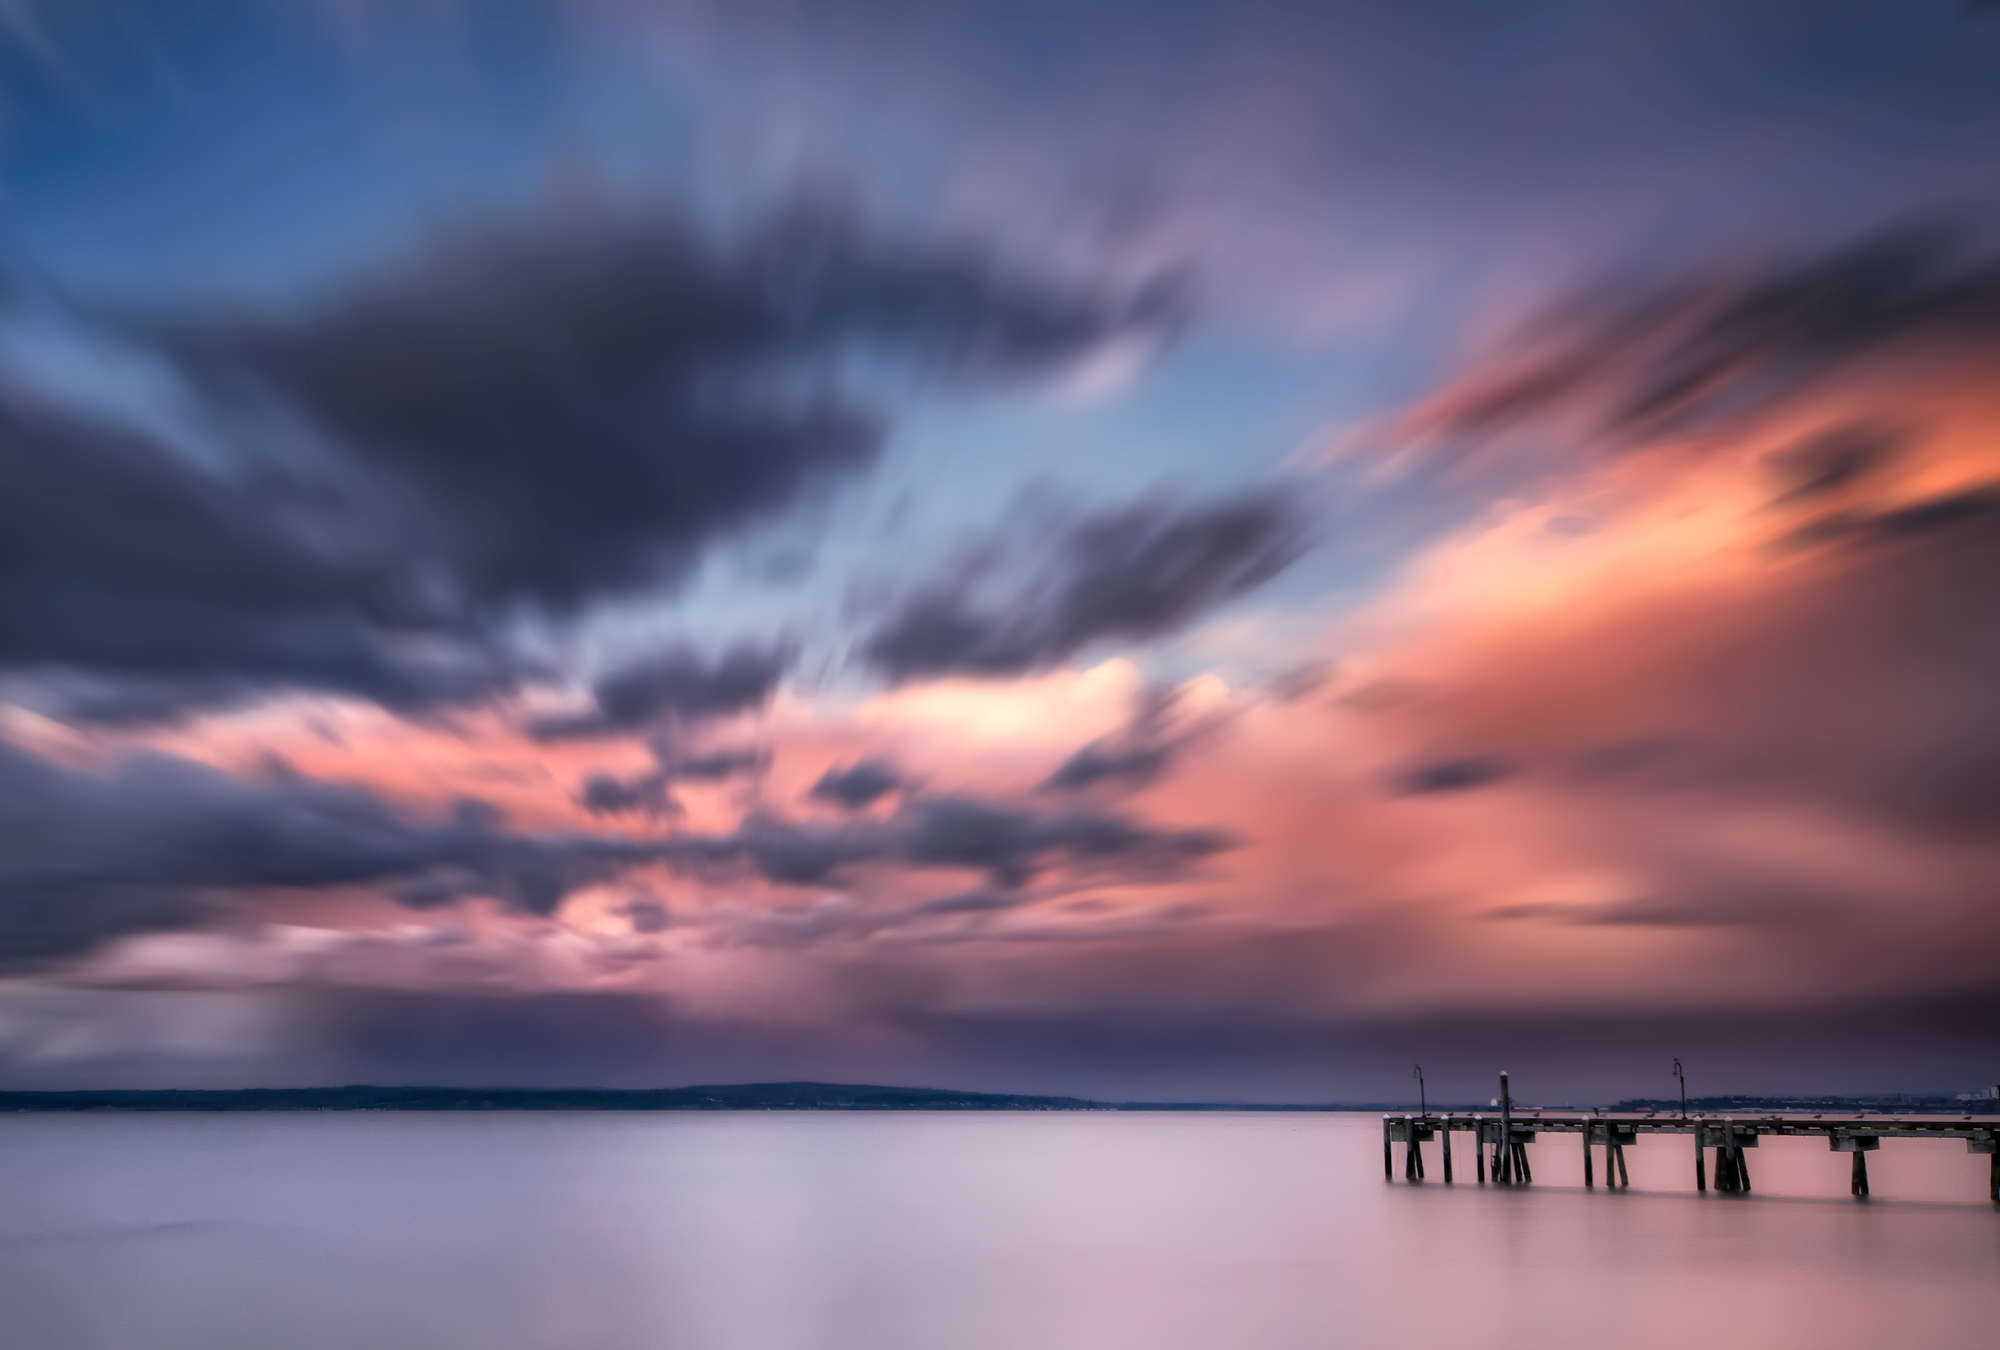             Photo wallpaper coastal landscape with jetty in the water and colourful clouds
        